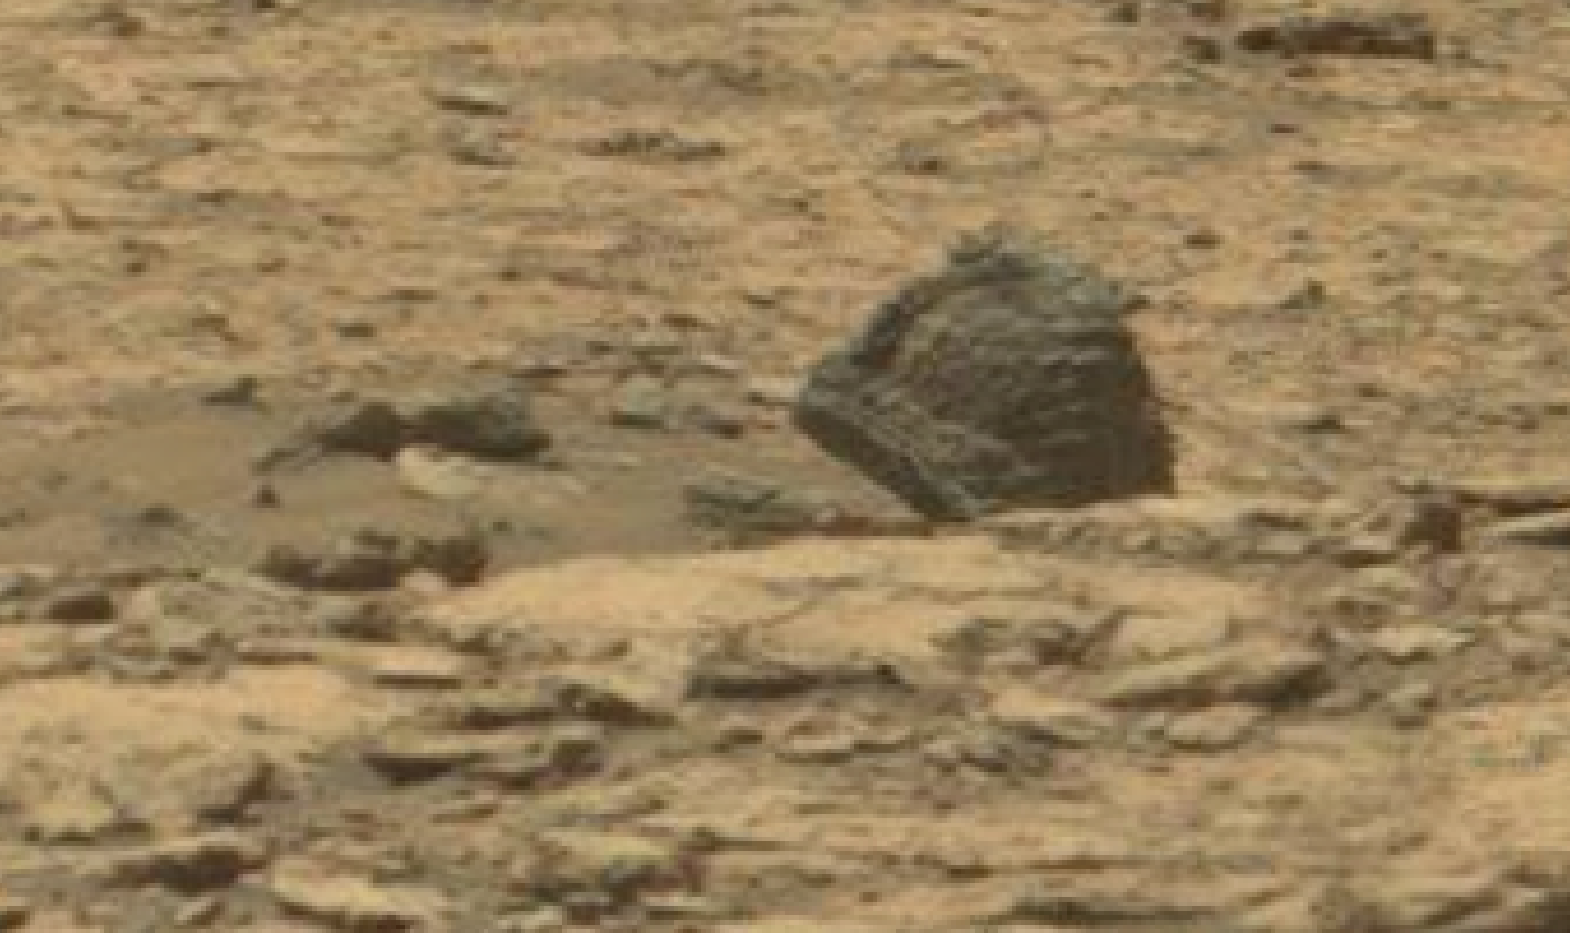 mars sol 1434 anomaly artifacts 18 was life on mars